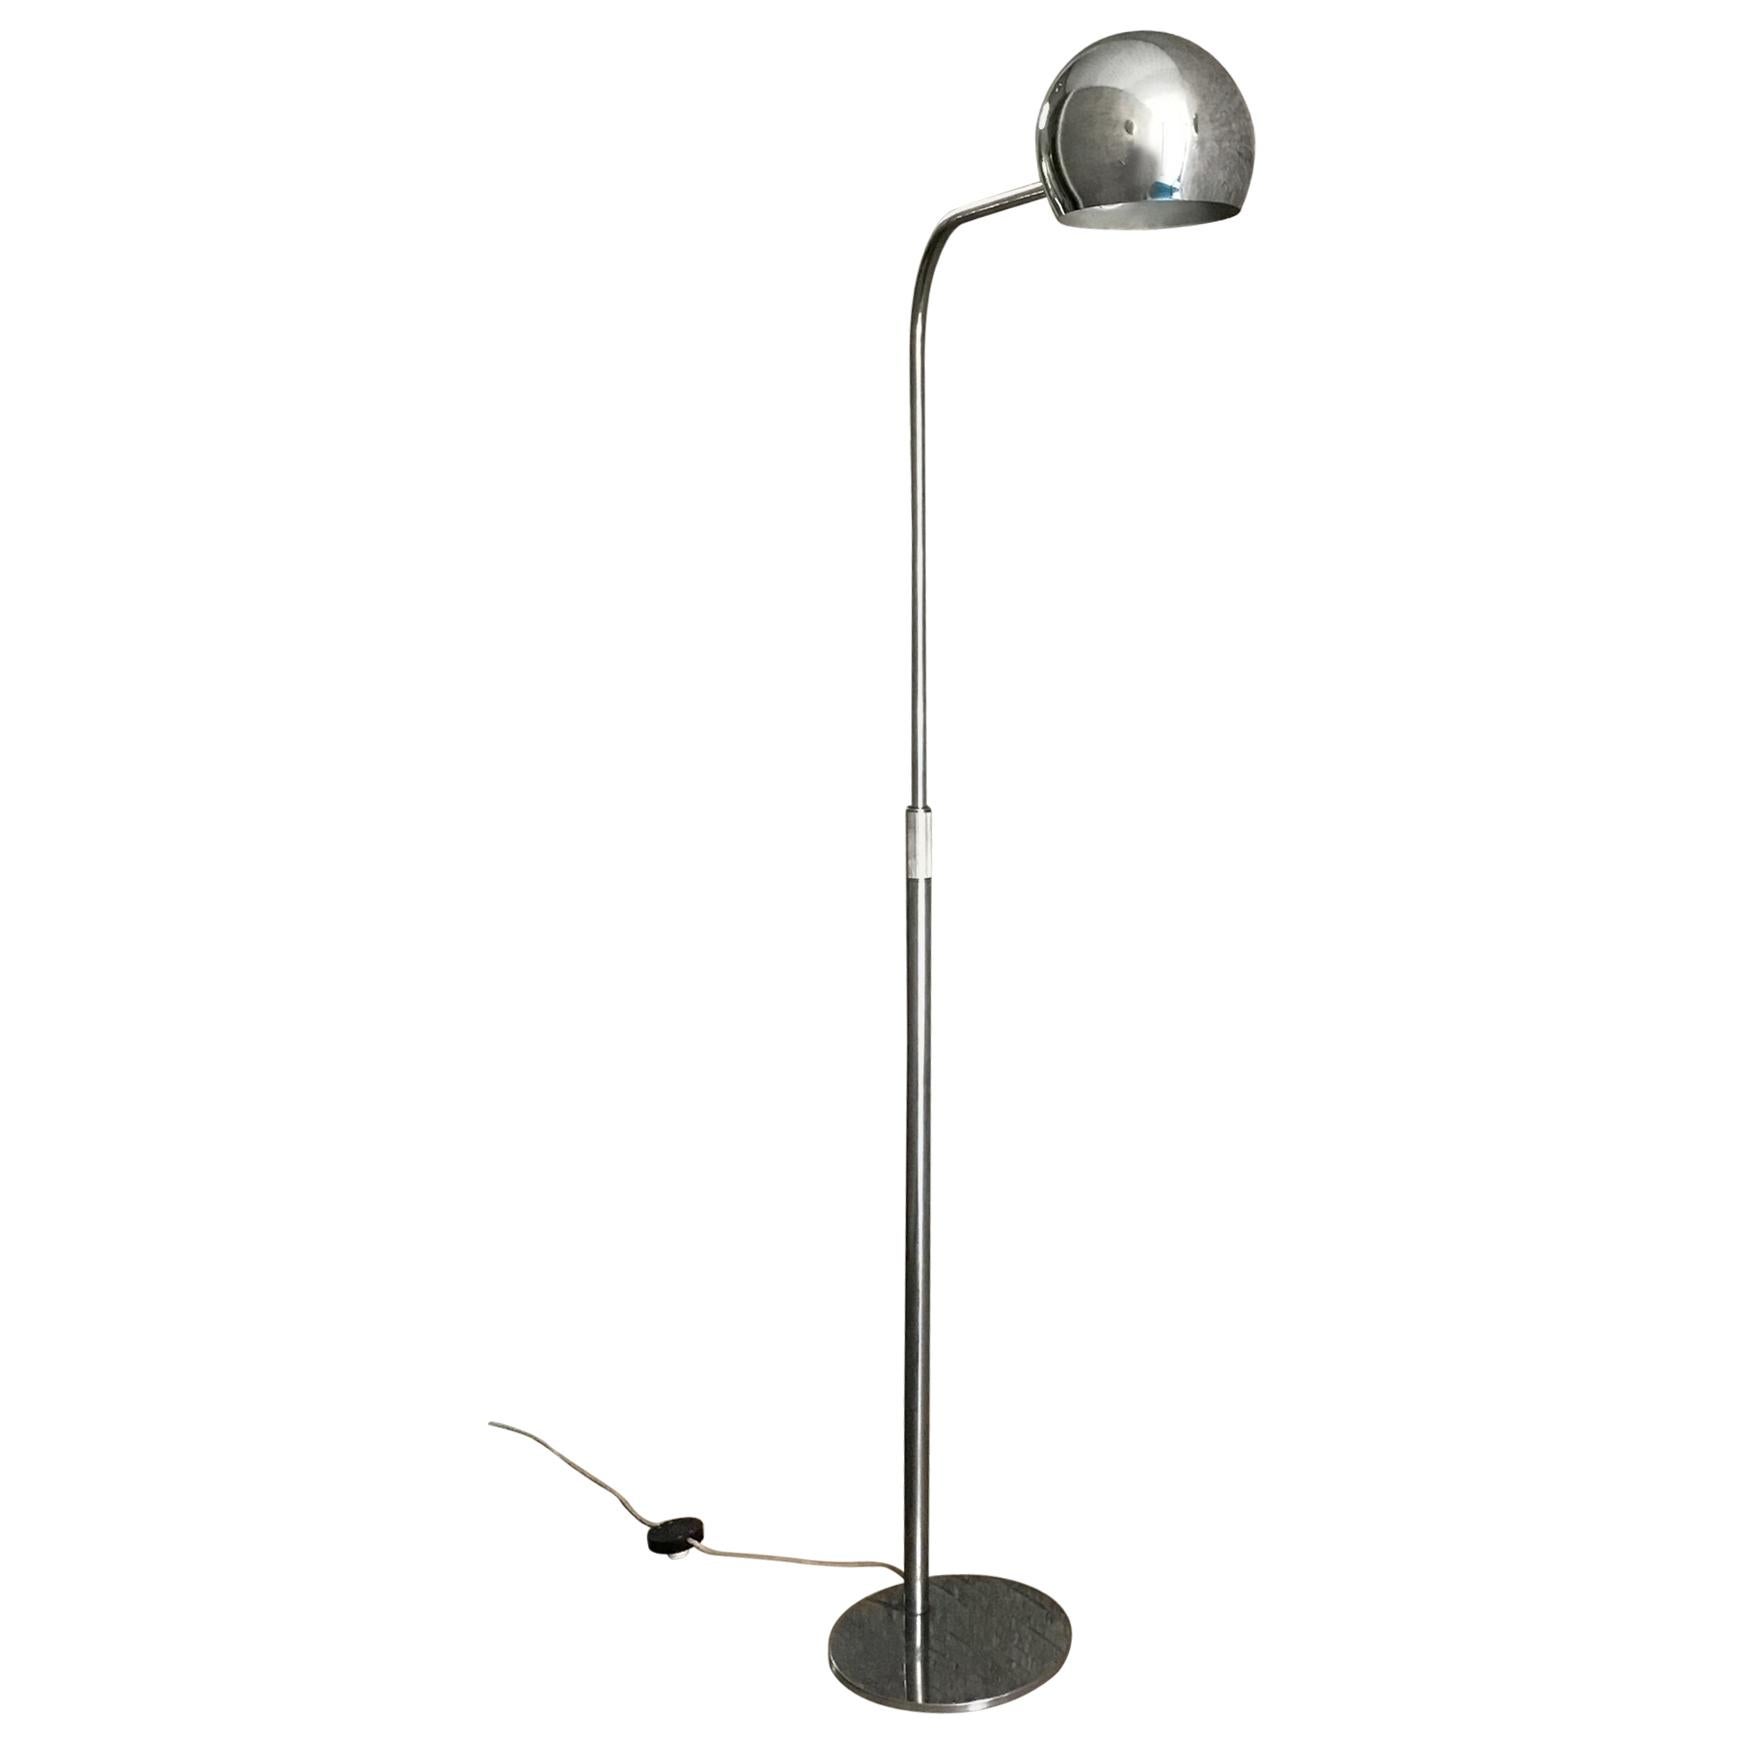 Sergio Asti Candle Floor Lamp 1960 Metal Chrom Italy For Sale